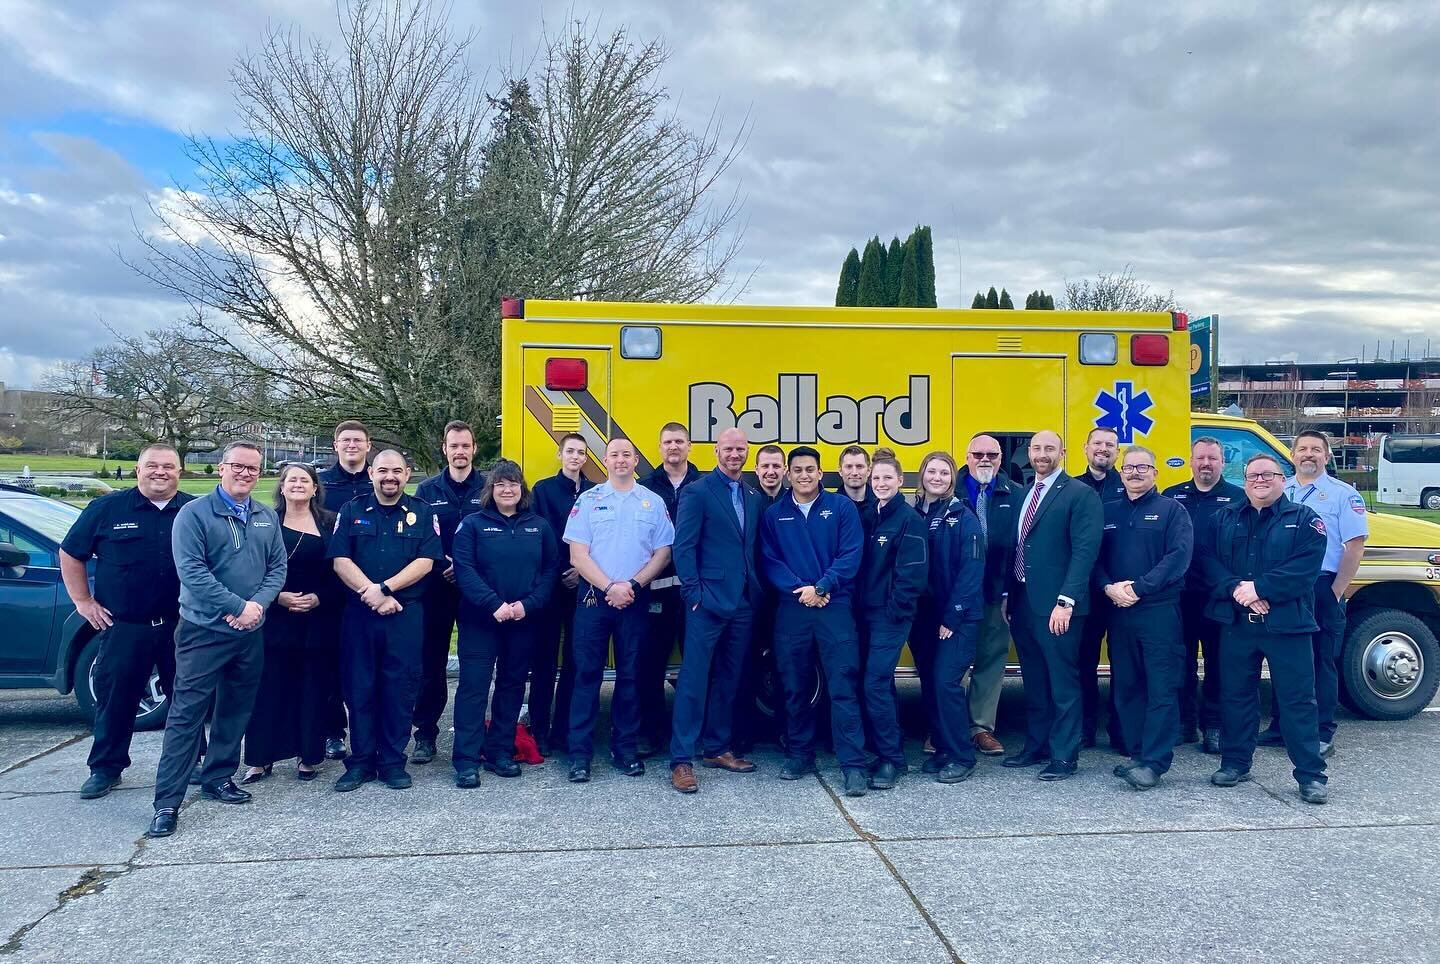 We had the great honor of participating in the annual EMS day that took place at the capital. Paramedics and EMTs from all over Washington state gathered in Olympia to meet with state legislators. It was a privilege to discuss new ideas to help resol